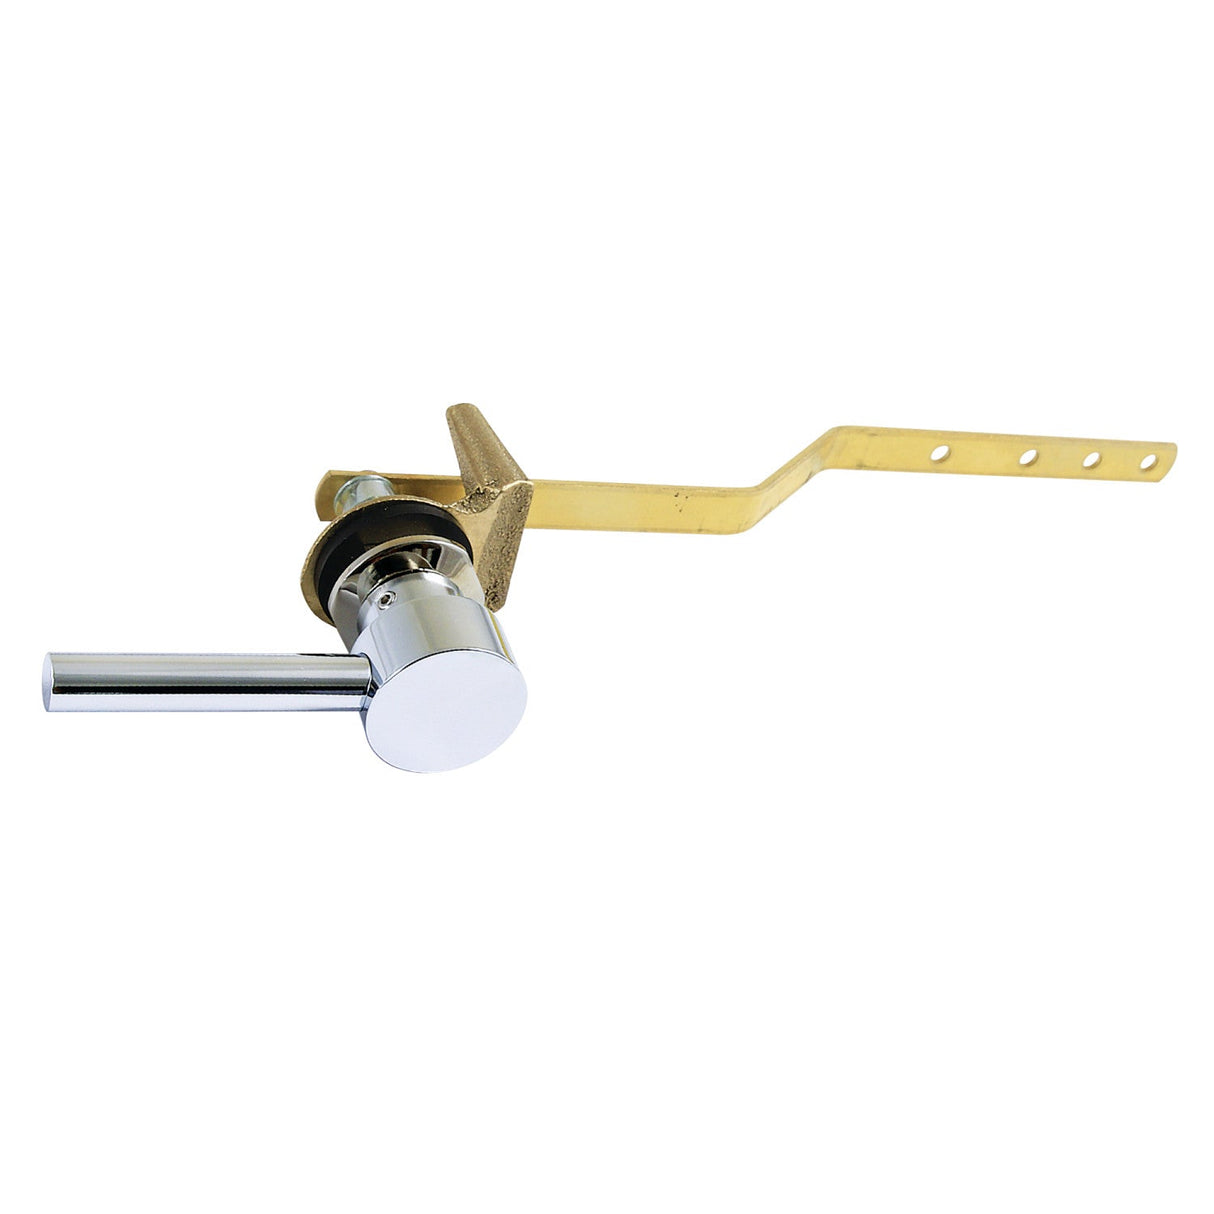 Concord KTDL1 Front Mount Toilet Tank Lever, Polished Chrome